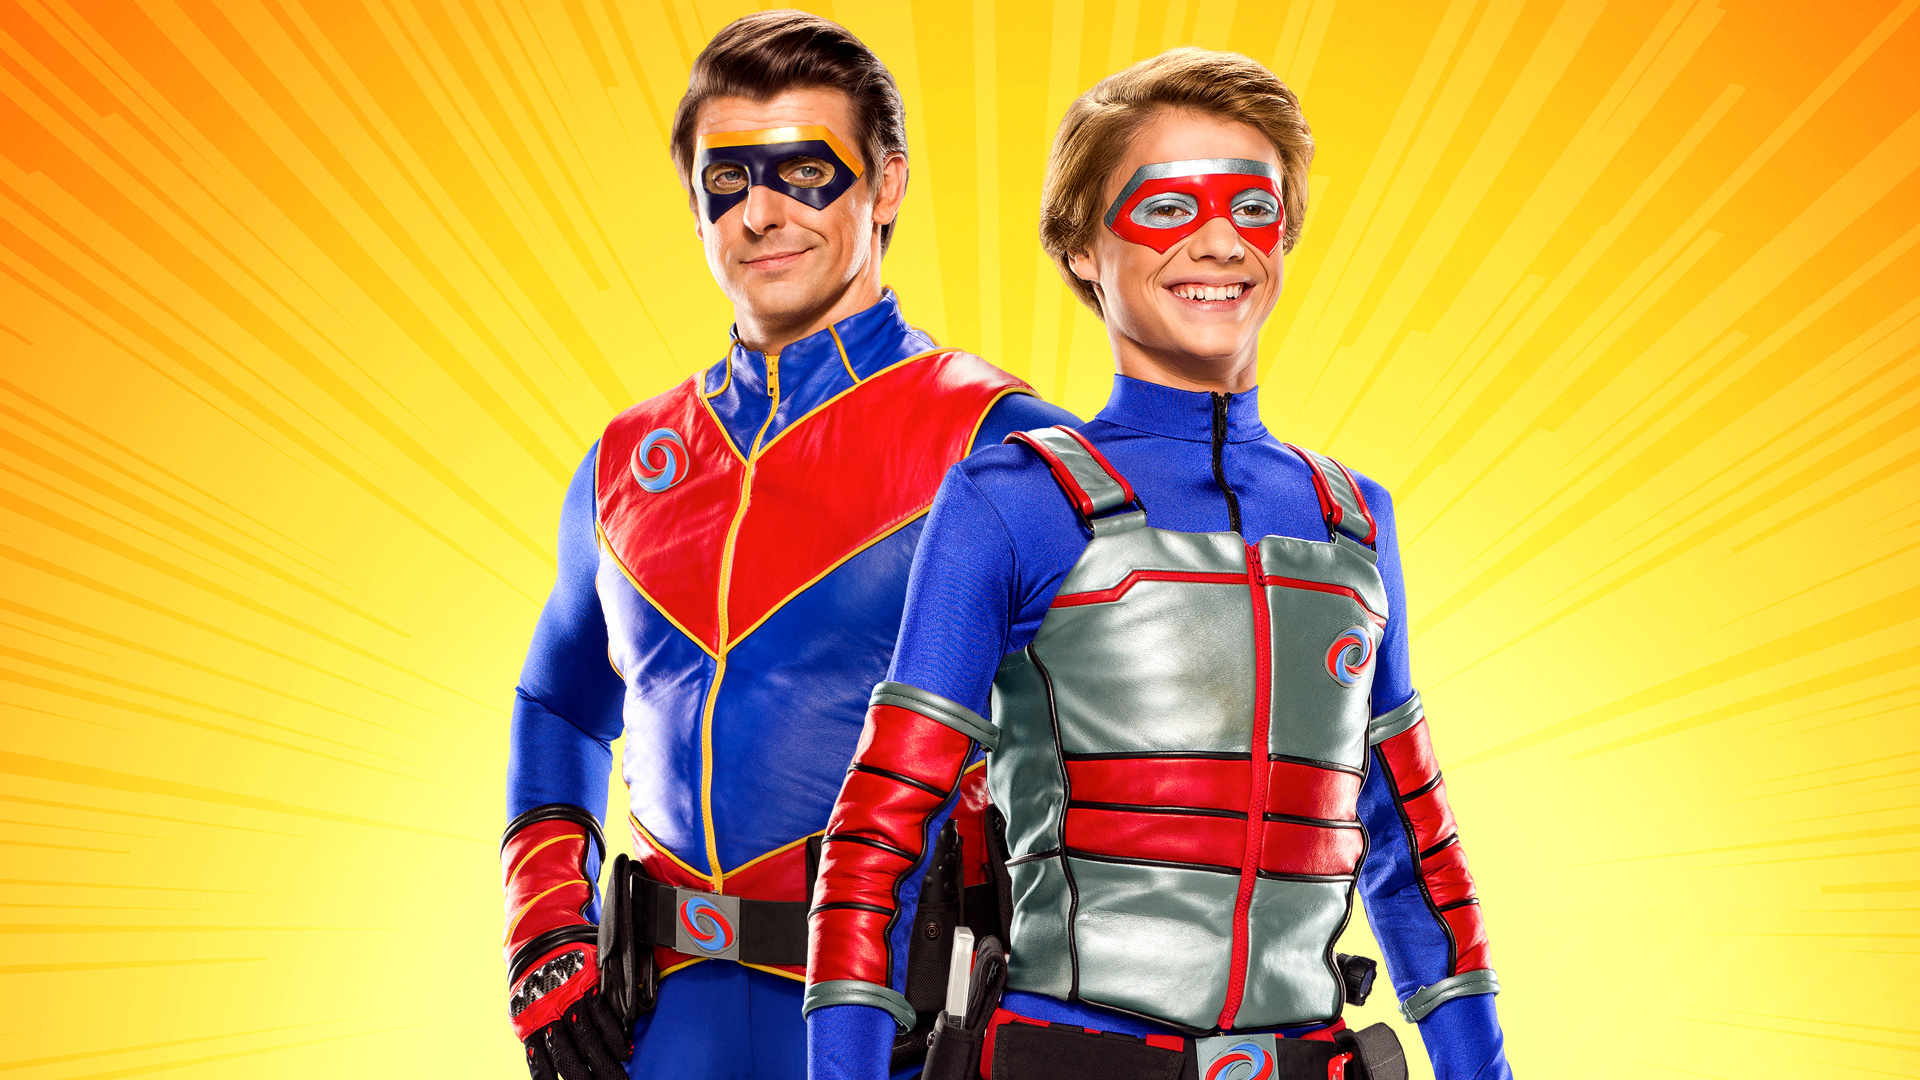 Henry Danger wallpapers, Sarah Simpson collection, Vibrant backgrounds, Iconic moments, 1920x1080 Full HD Desktop